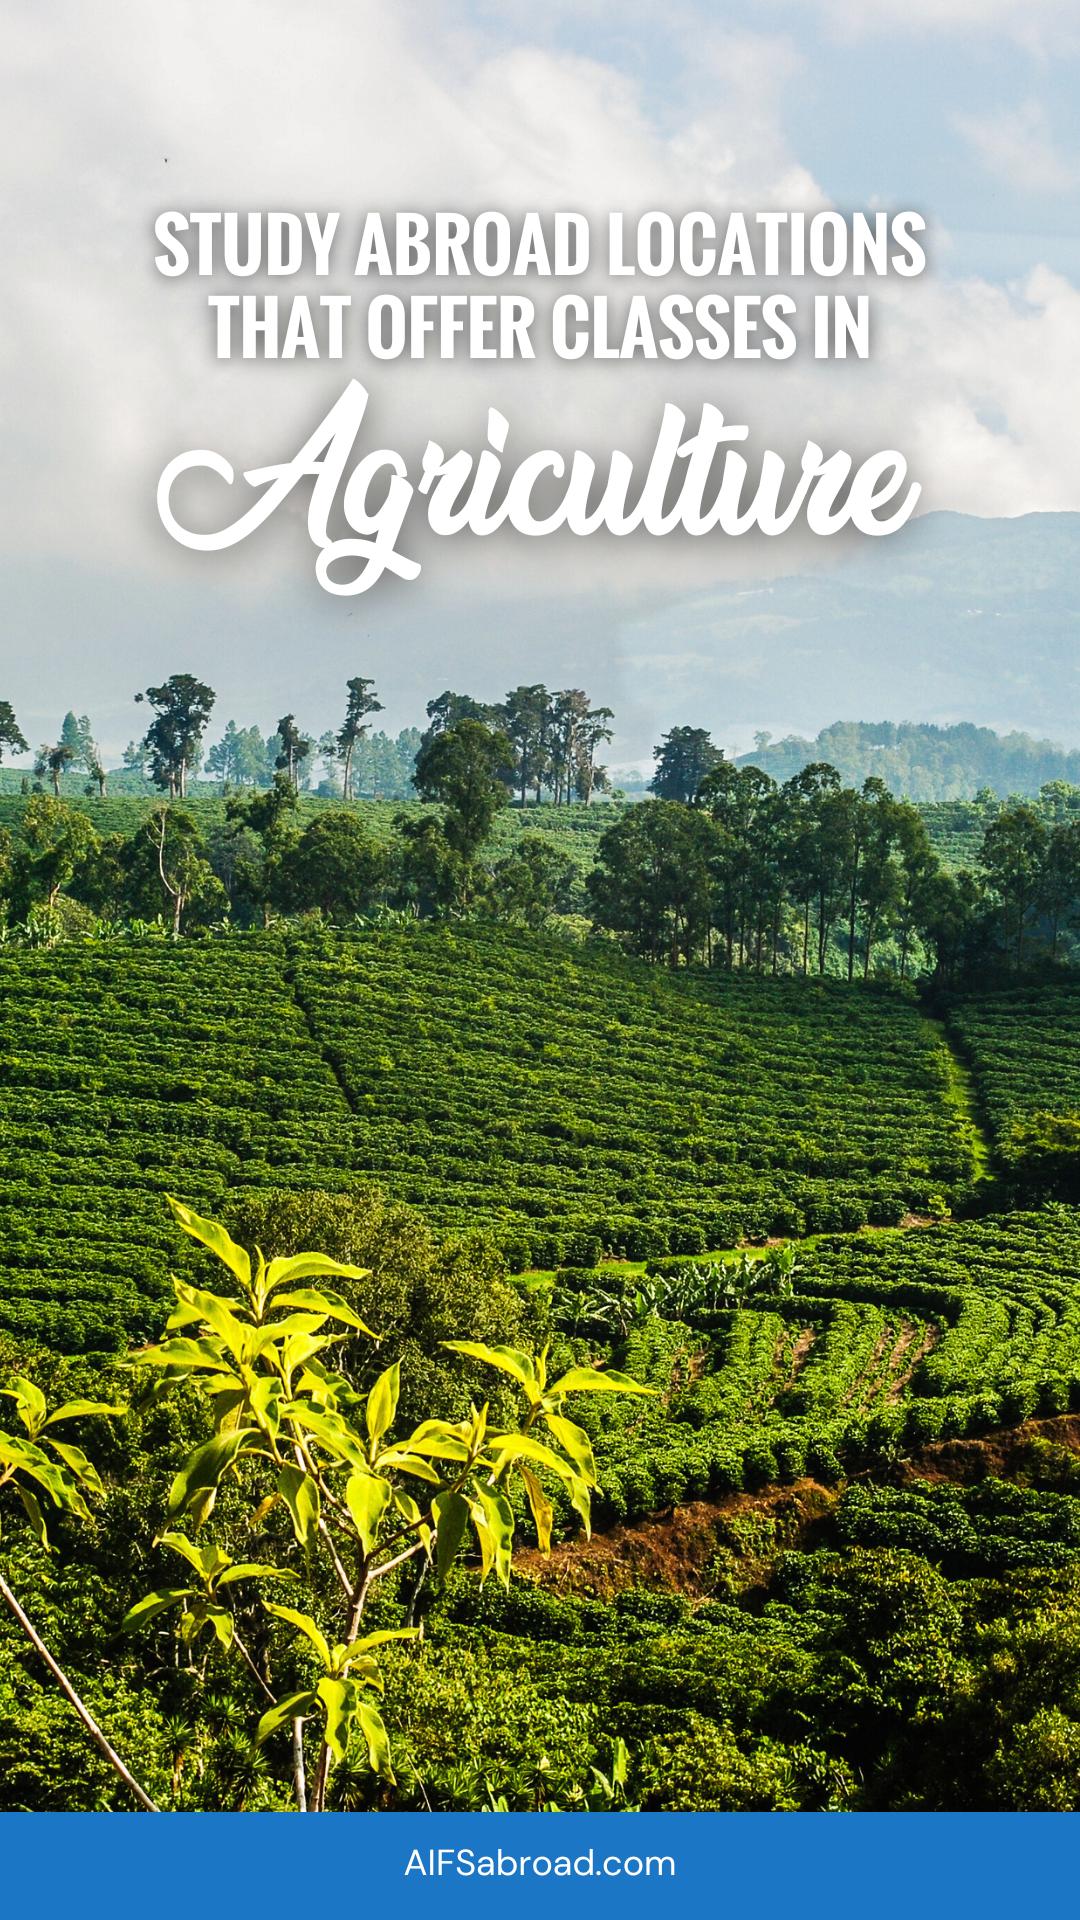 Pin image - Costa Rica agricultural farm with text overlay "Study Abroad Locations that Offer Classes in Agriculture"